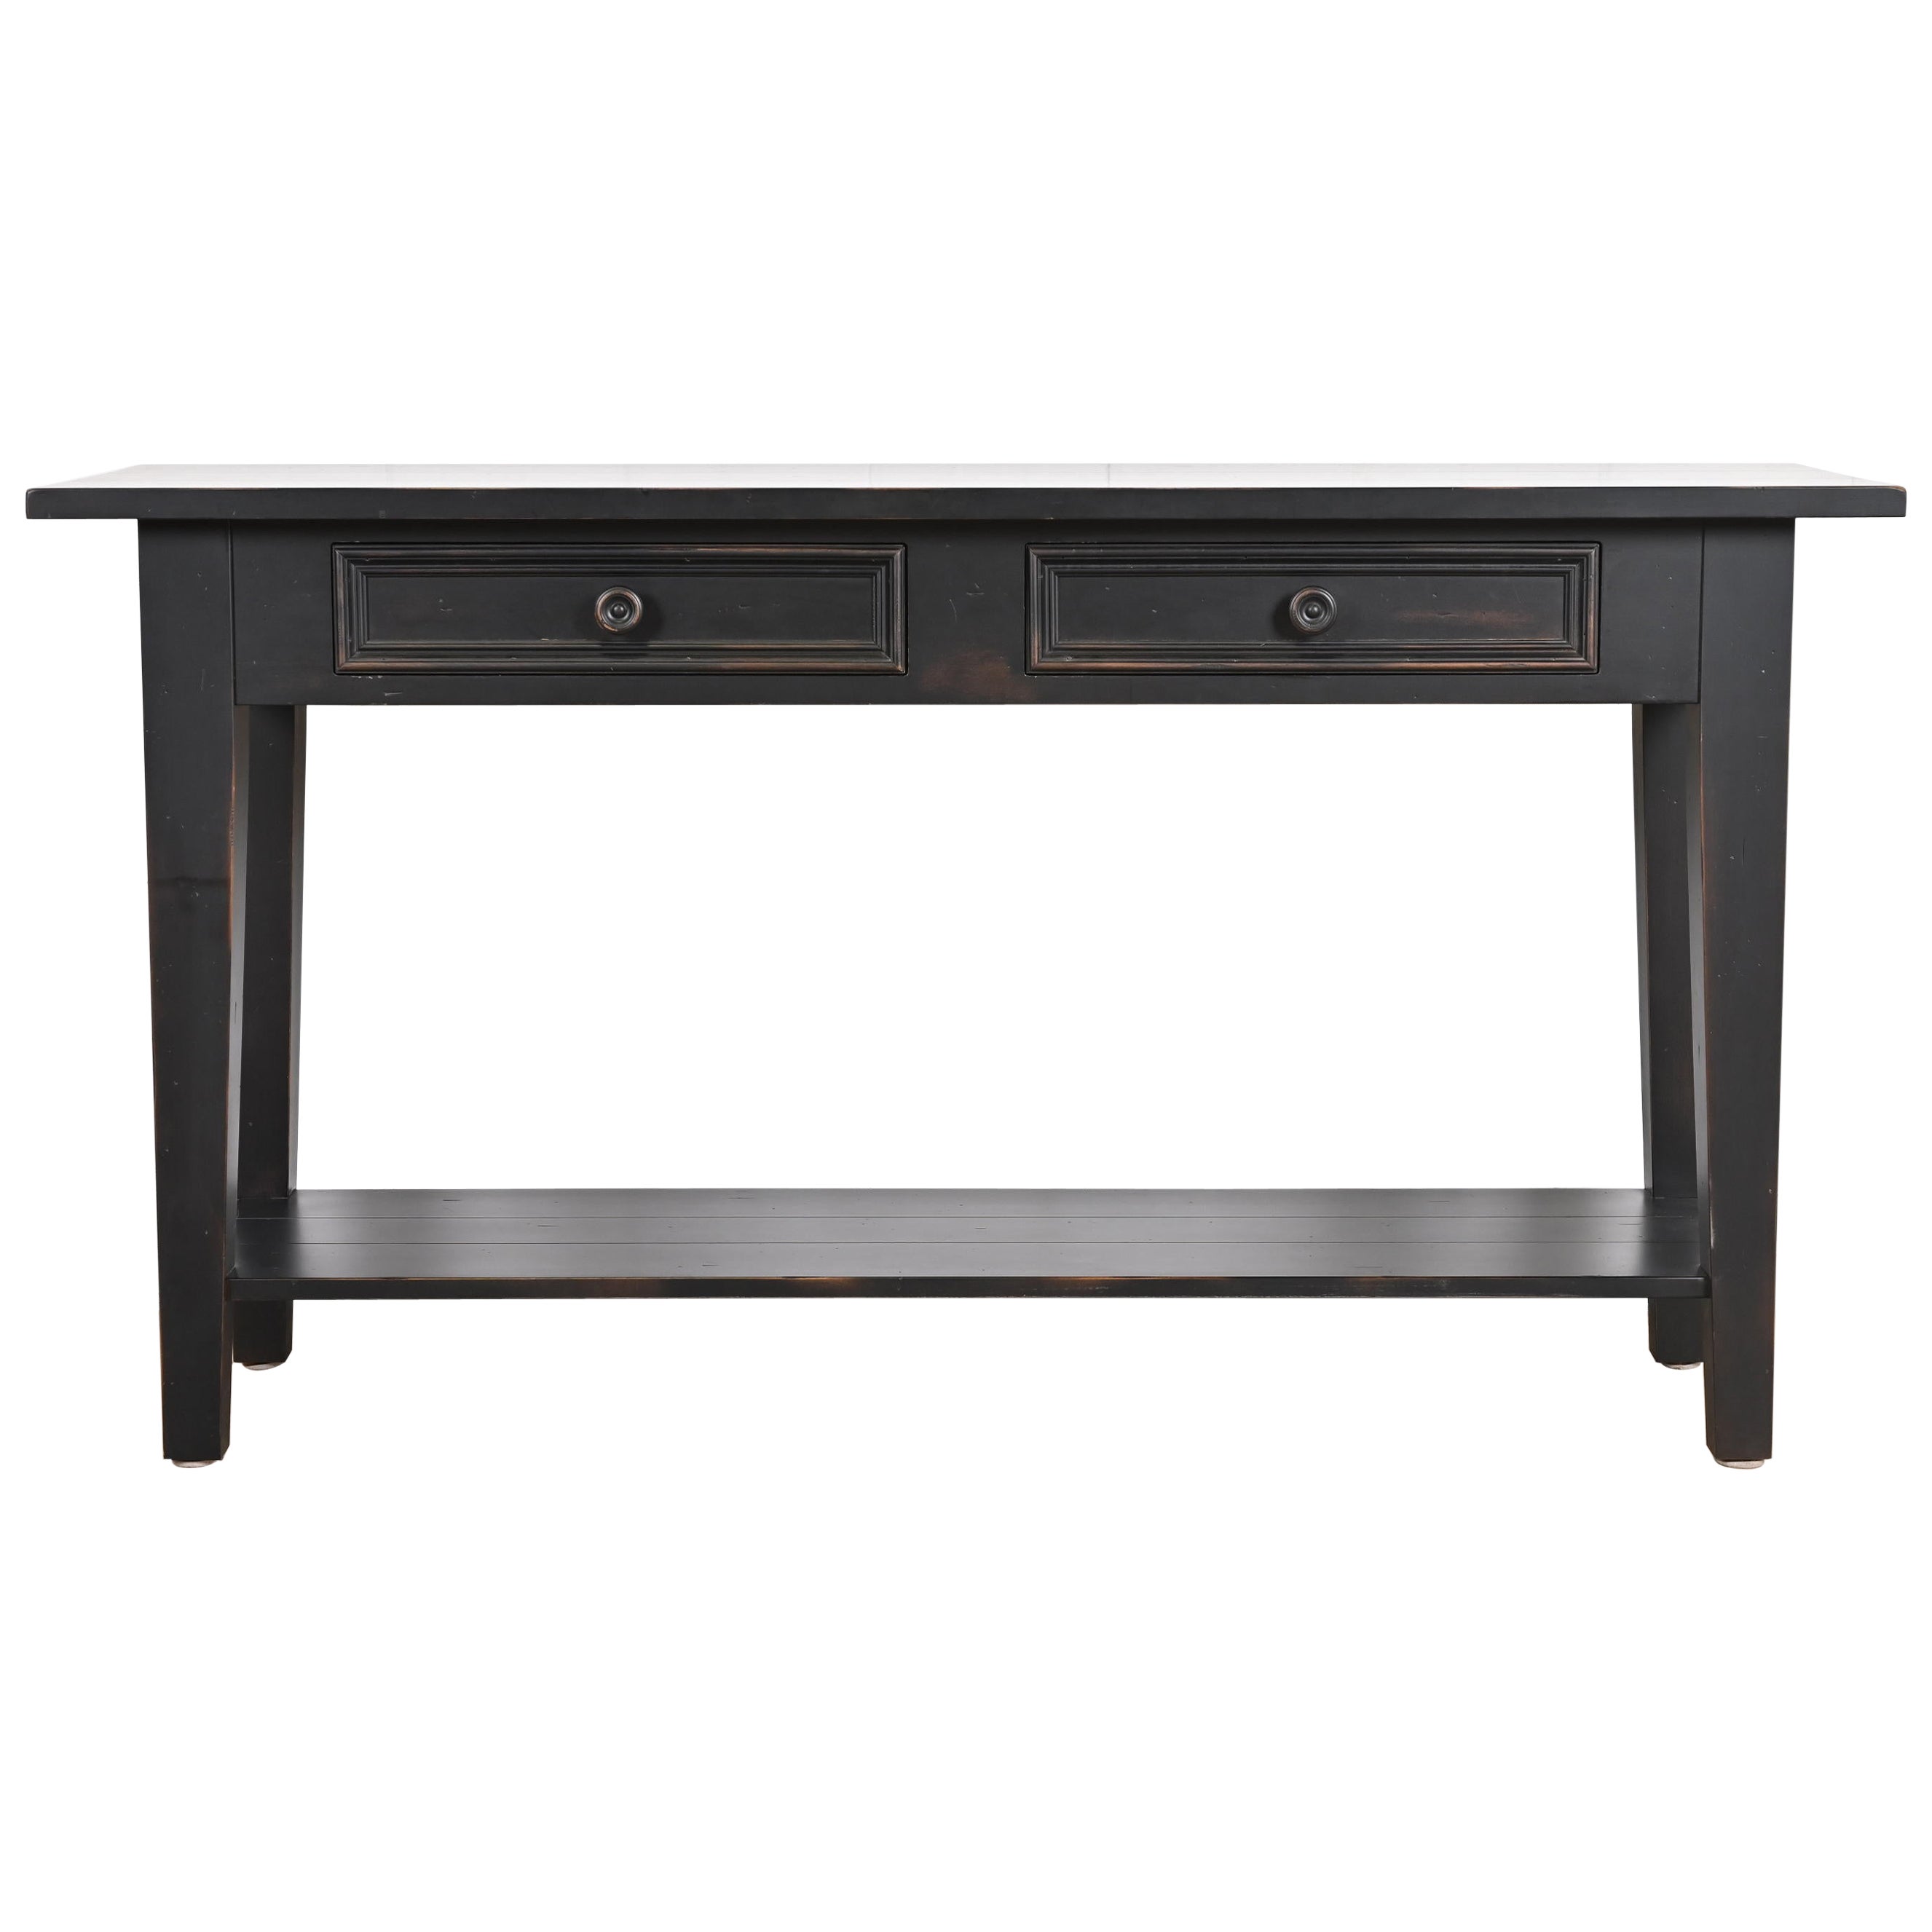 Shaker Style Ebonized Maple Sideboard Buffet Server or Console Table